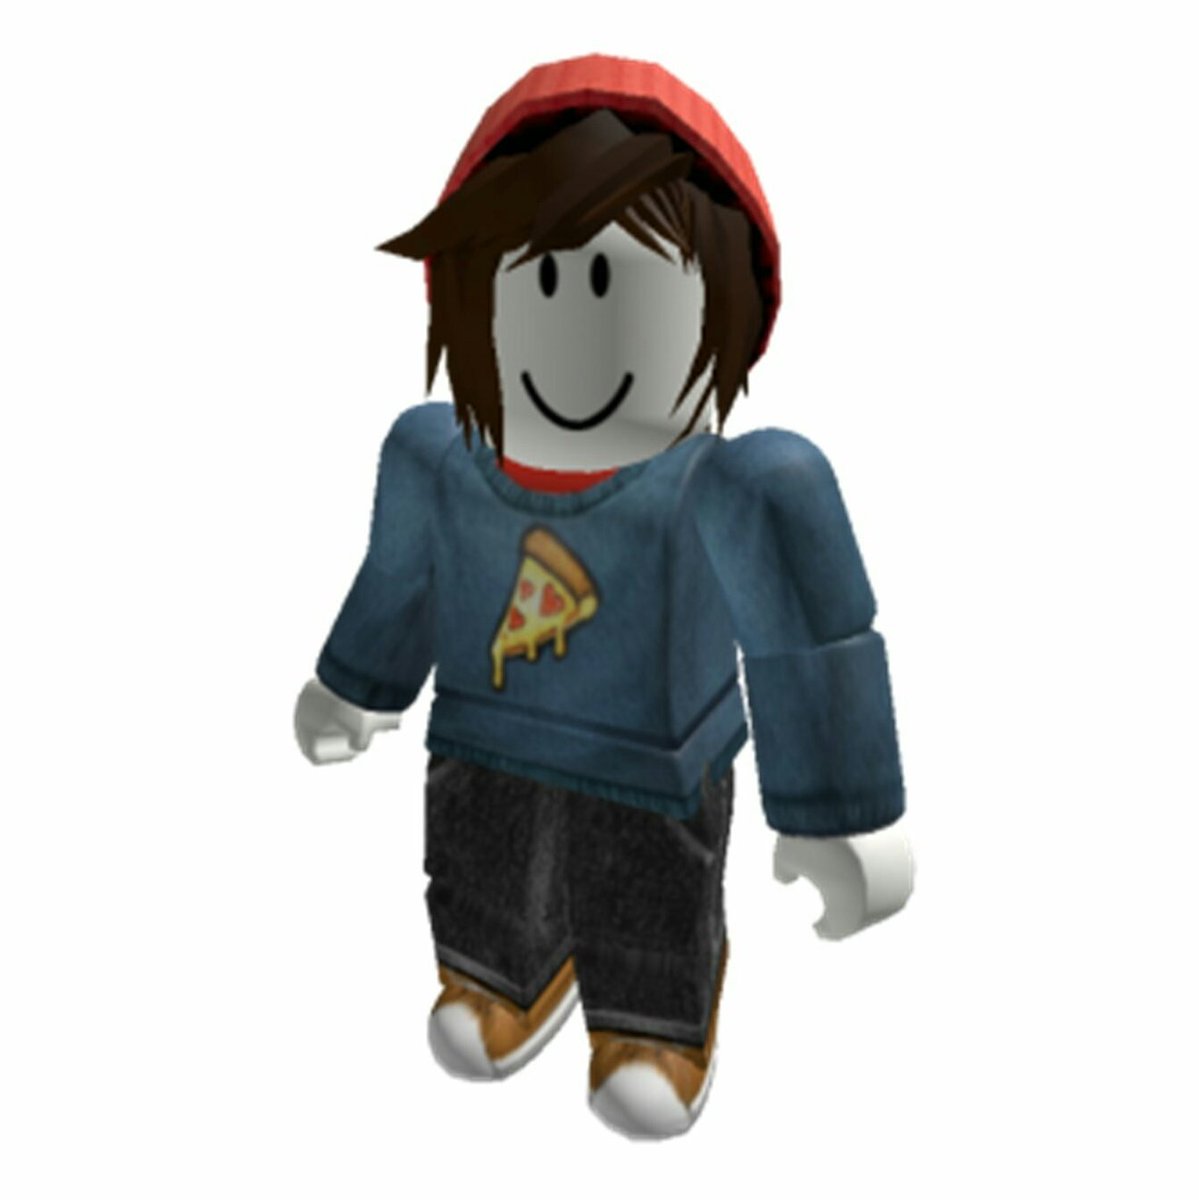 Lord Cowcow On Twitter I Get Roblox Trying To Do The Whole Gender Neutral No Gender Thing With The Sign Up Page And That S Totally Fine But Cmon Why Does This Have To - non binary roblox avatar